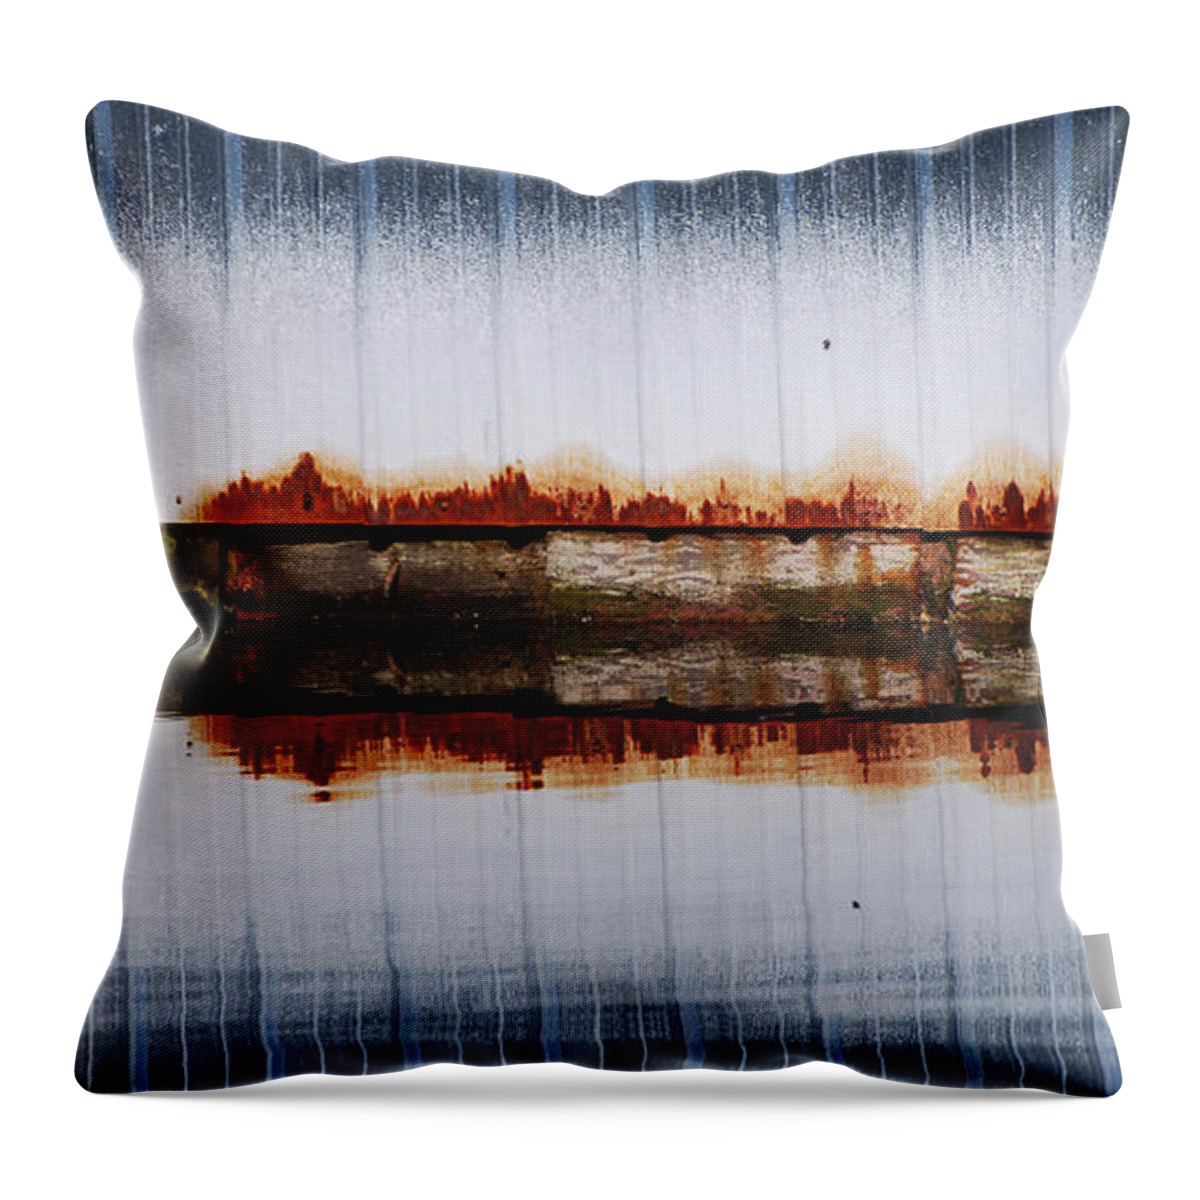 Industrial Throw Pillow featuring the photograph Waterline by Jani Freimann